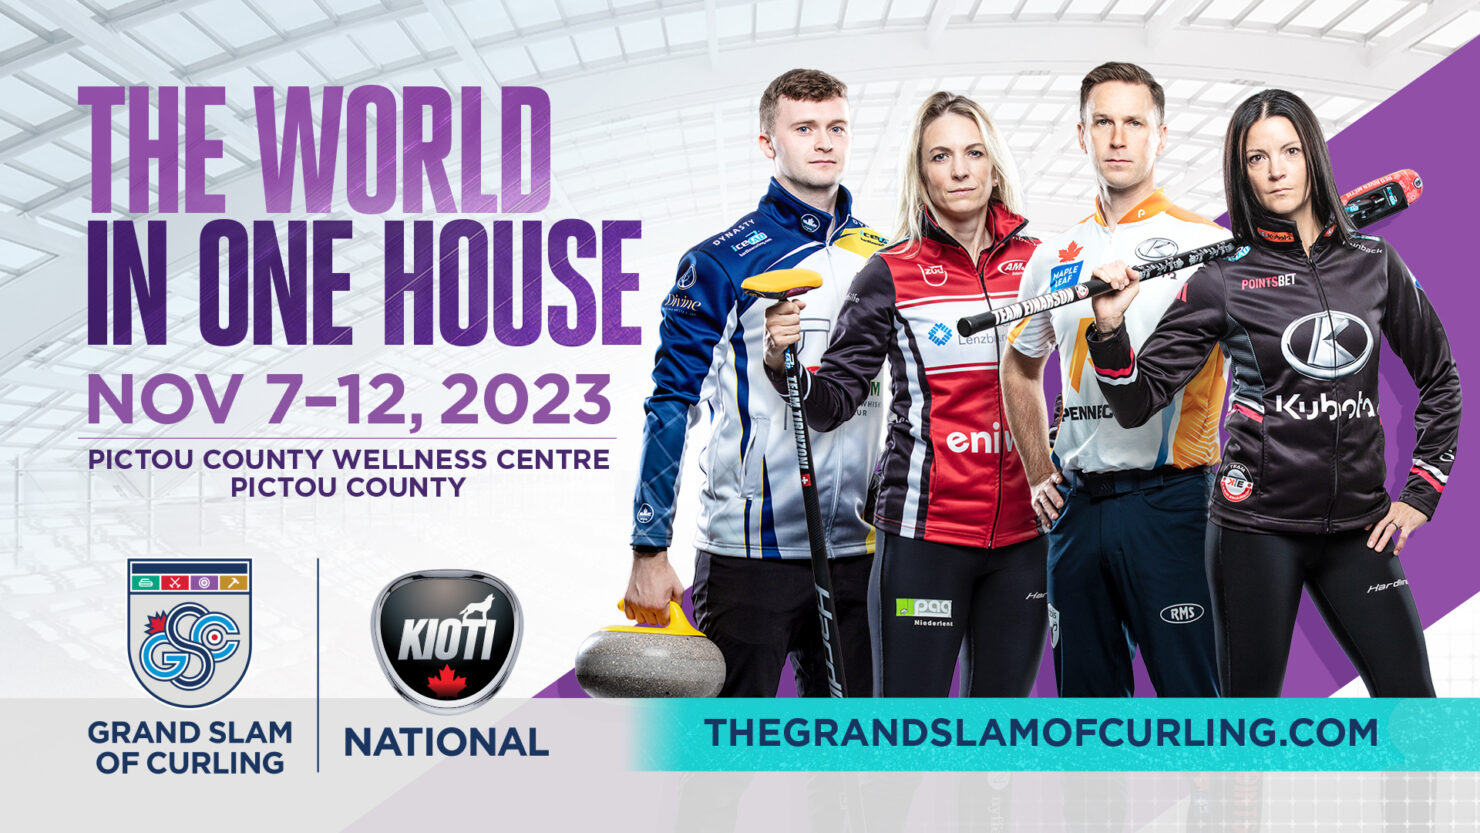 The Grand Slam of curling is heading to Pictou County for the KIOTI National in November.  7-12